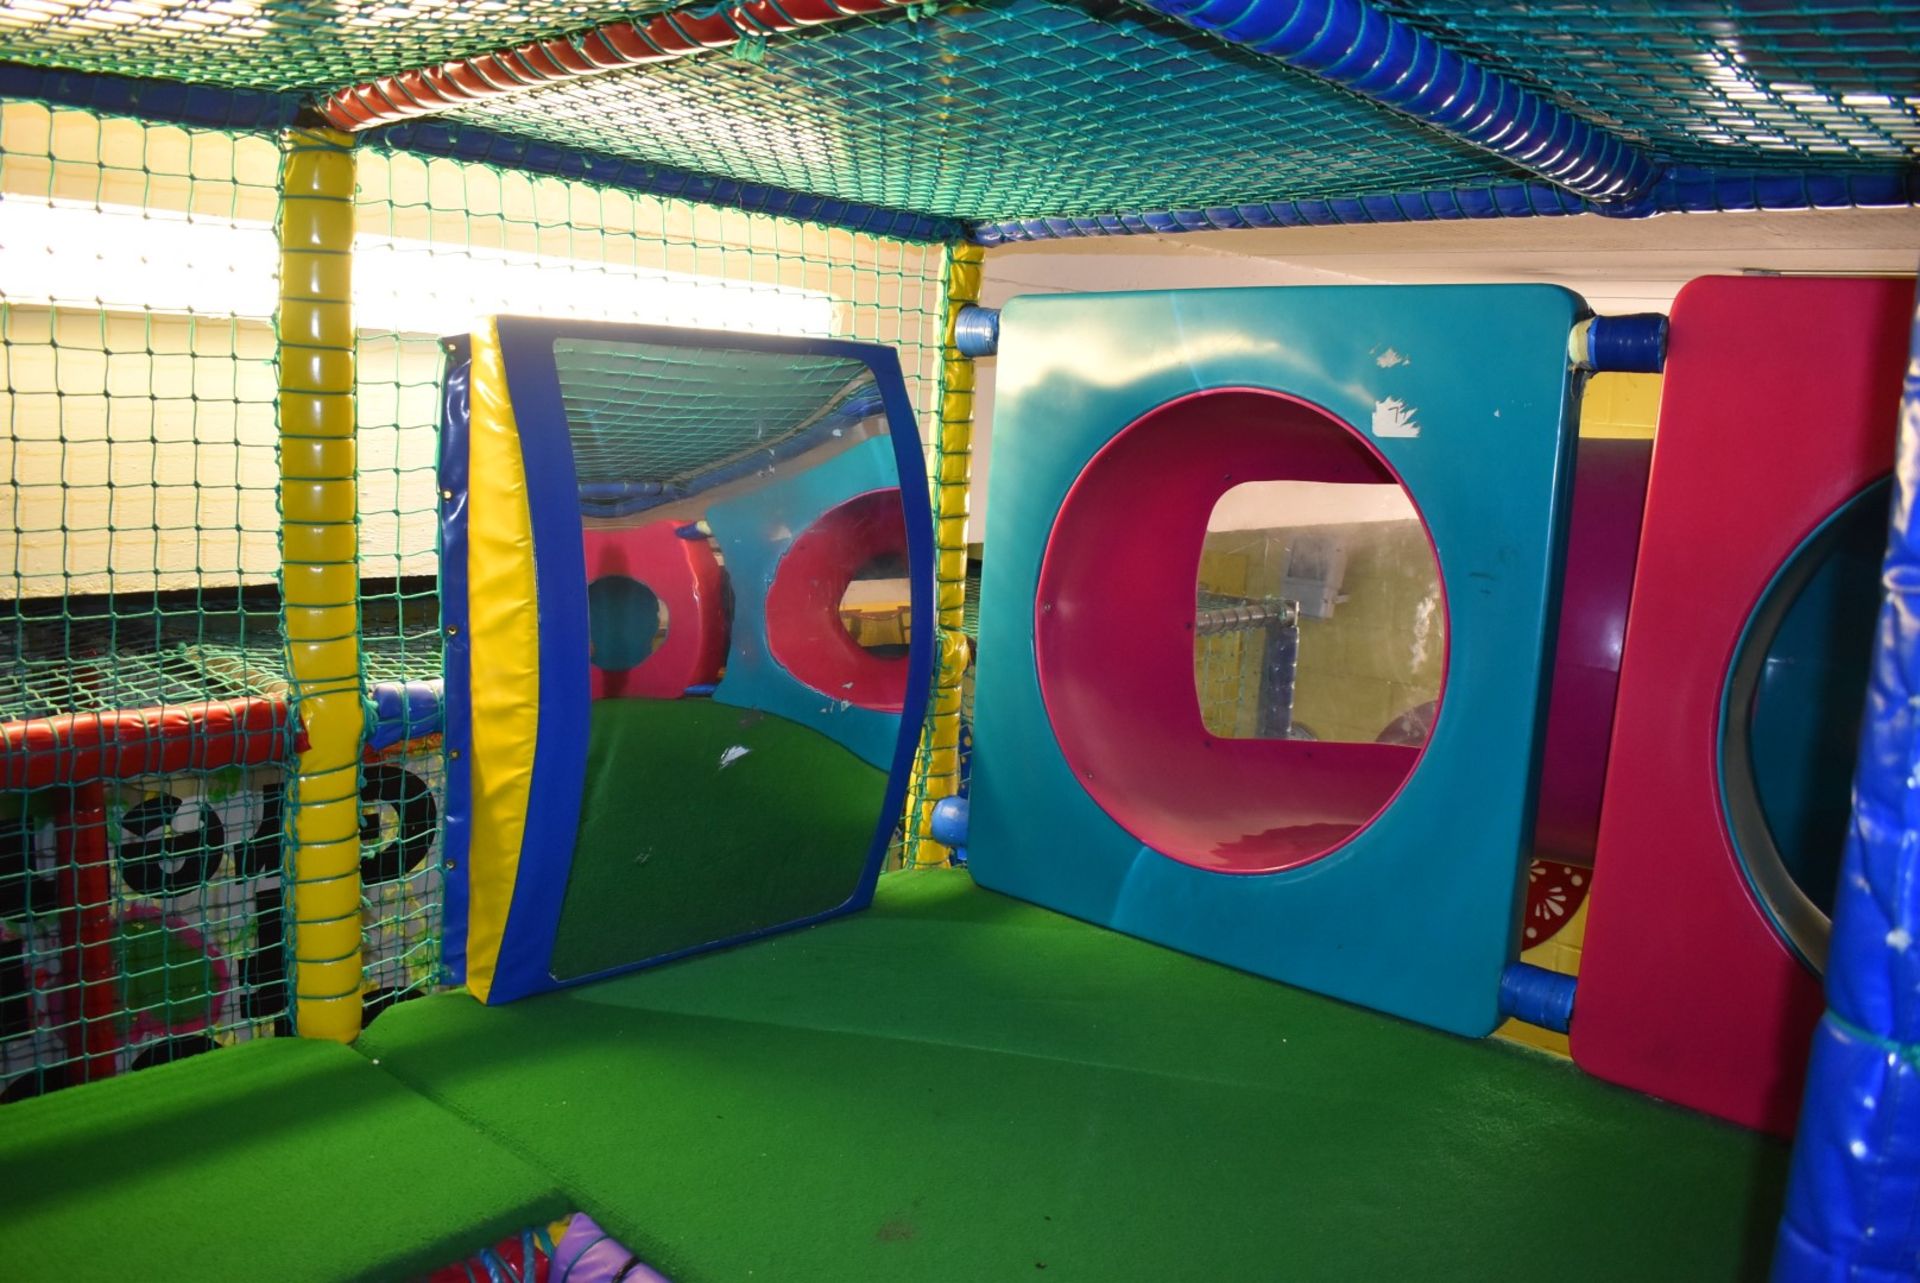 Bramleys Big Adventure Playground - Giant Action-Packed Playcentre With Slides, Zip Line Swings, - Image 65 of 128